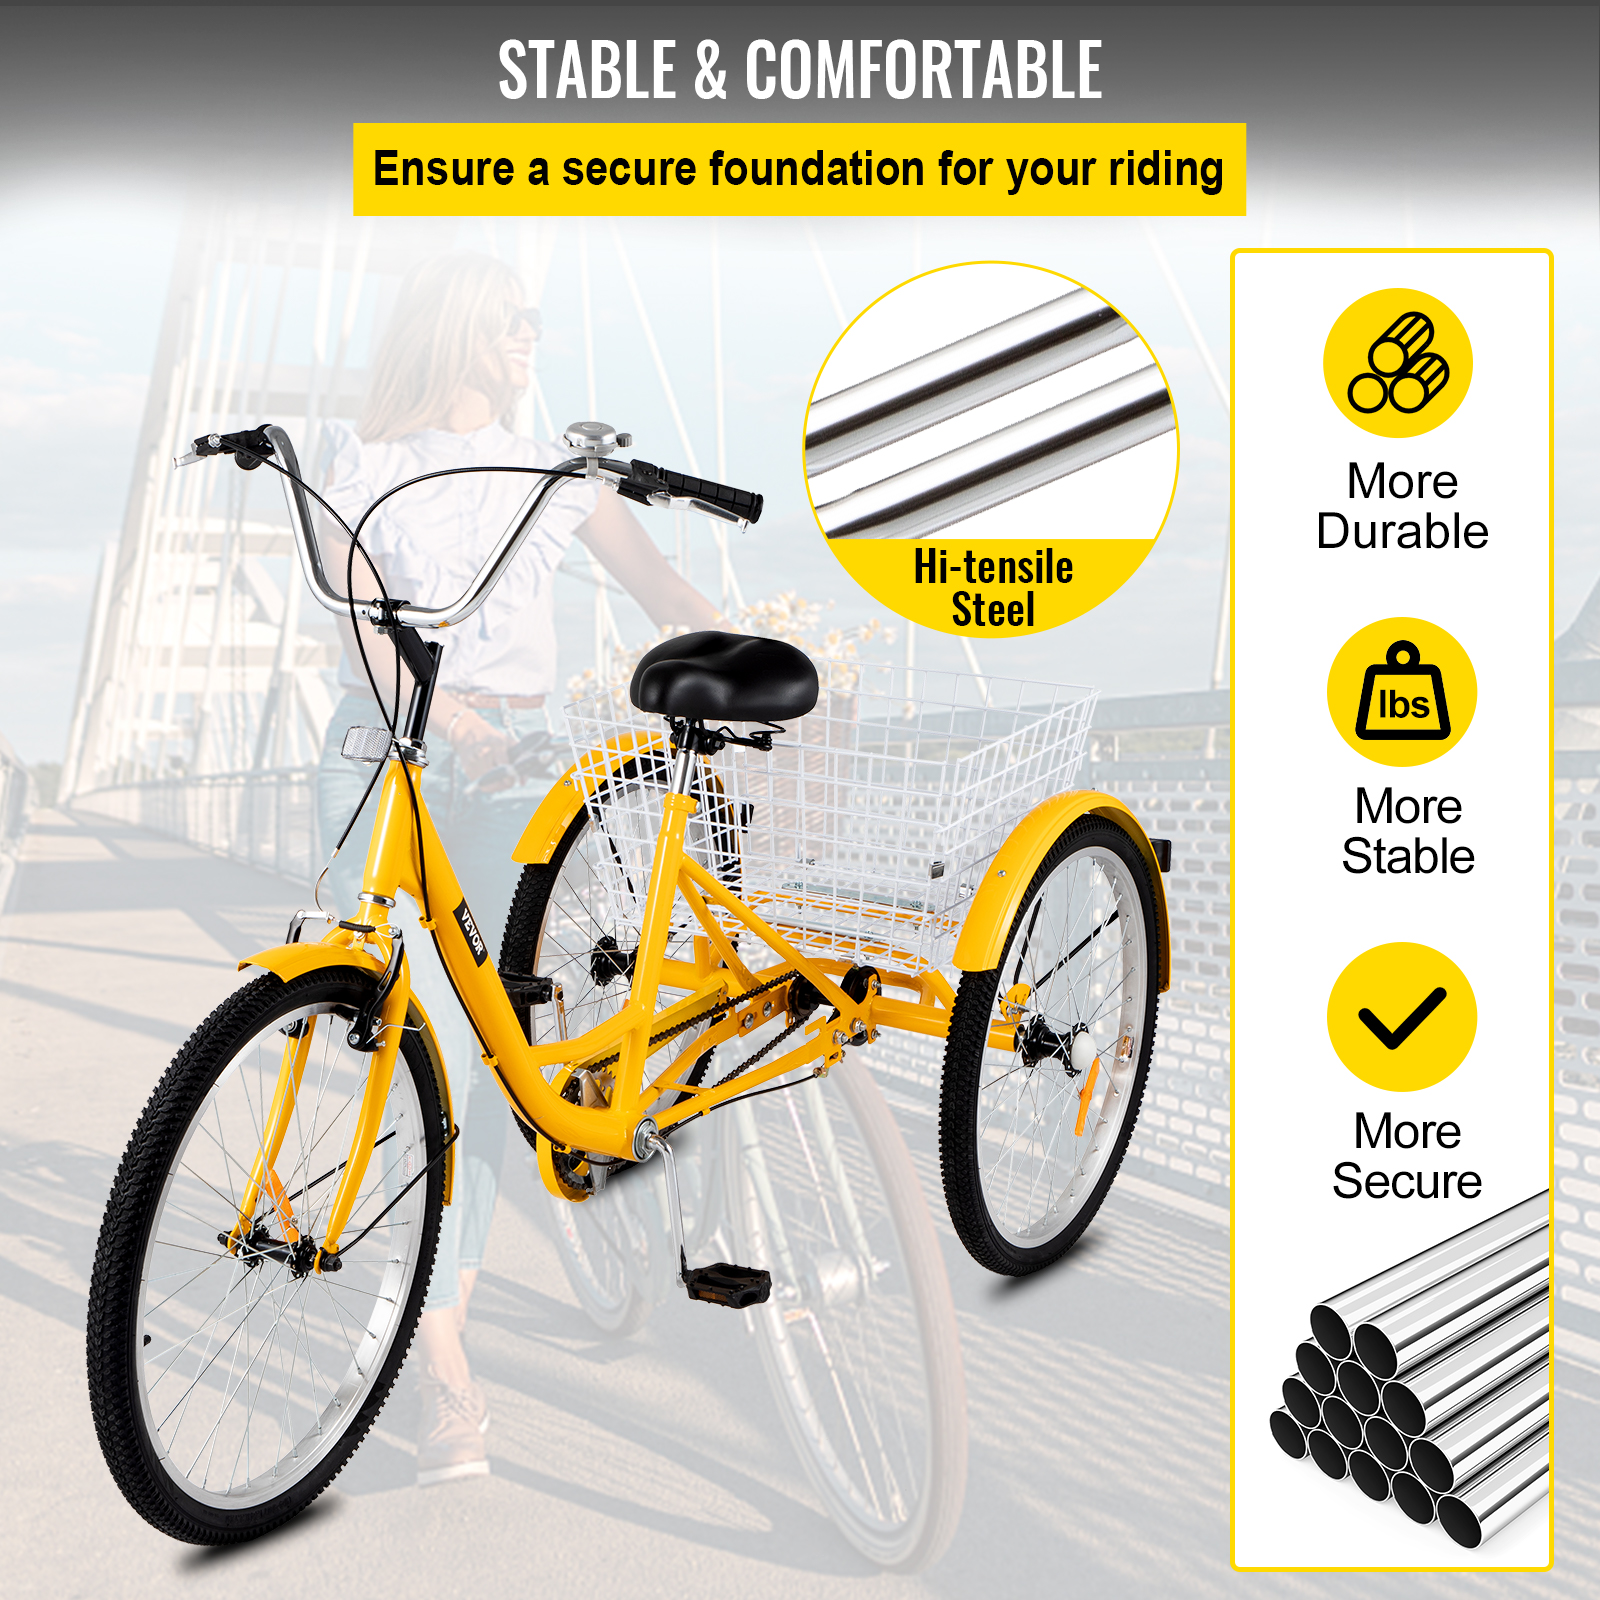 VEVOR Adult Tricycle 24 inch, 1-Speed Three Wheel Bikes , Yellow Tricycle with Bell Brake System, Bicycles with Cargo Basket for Shopping - image 4 of 9